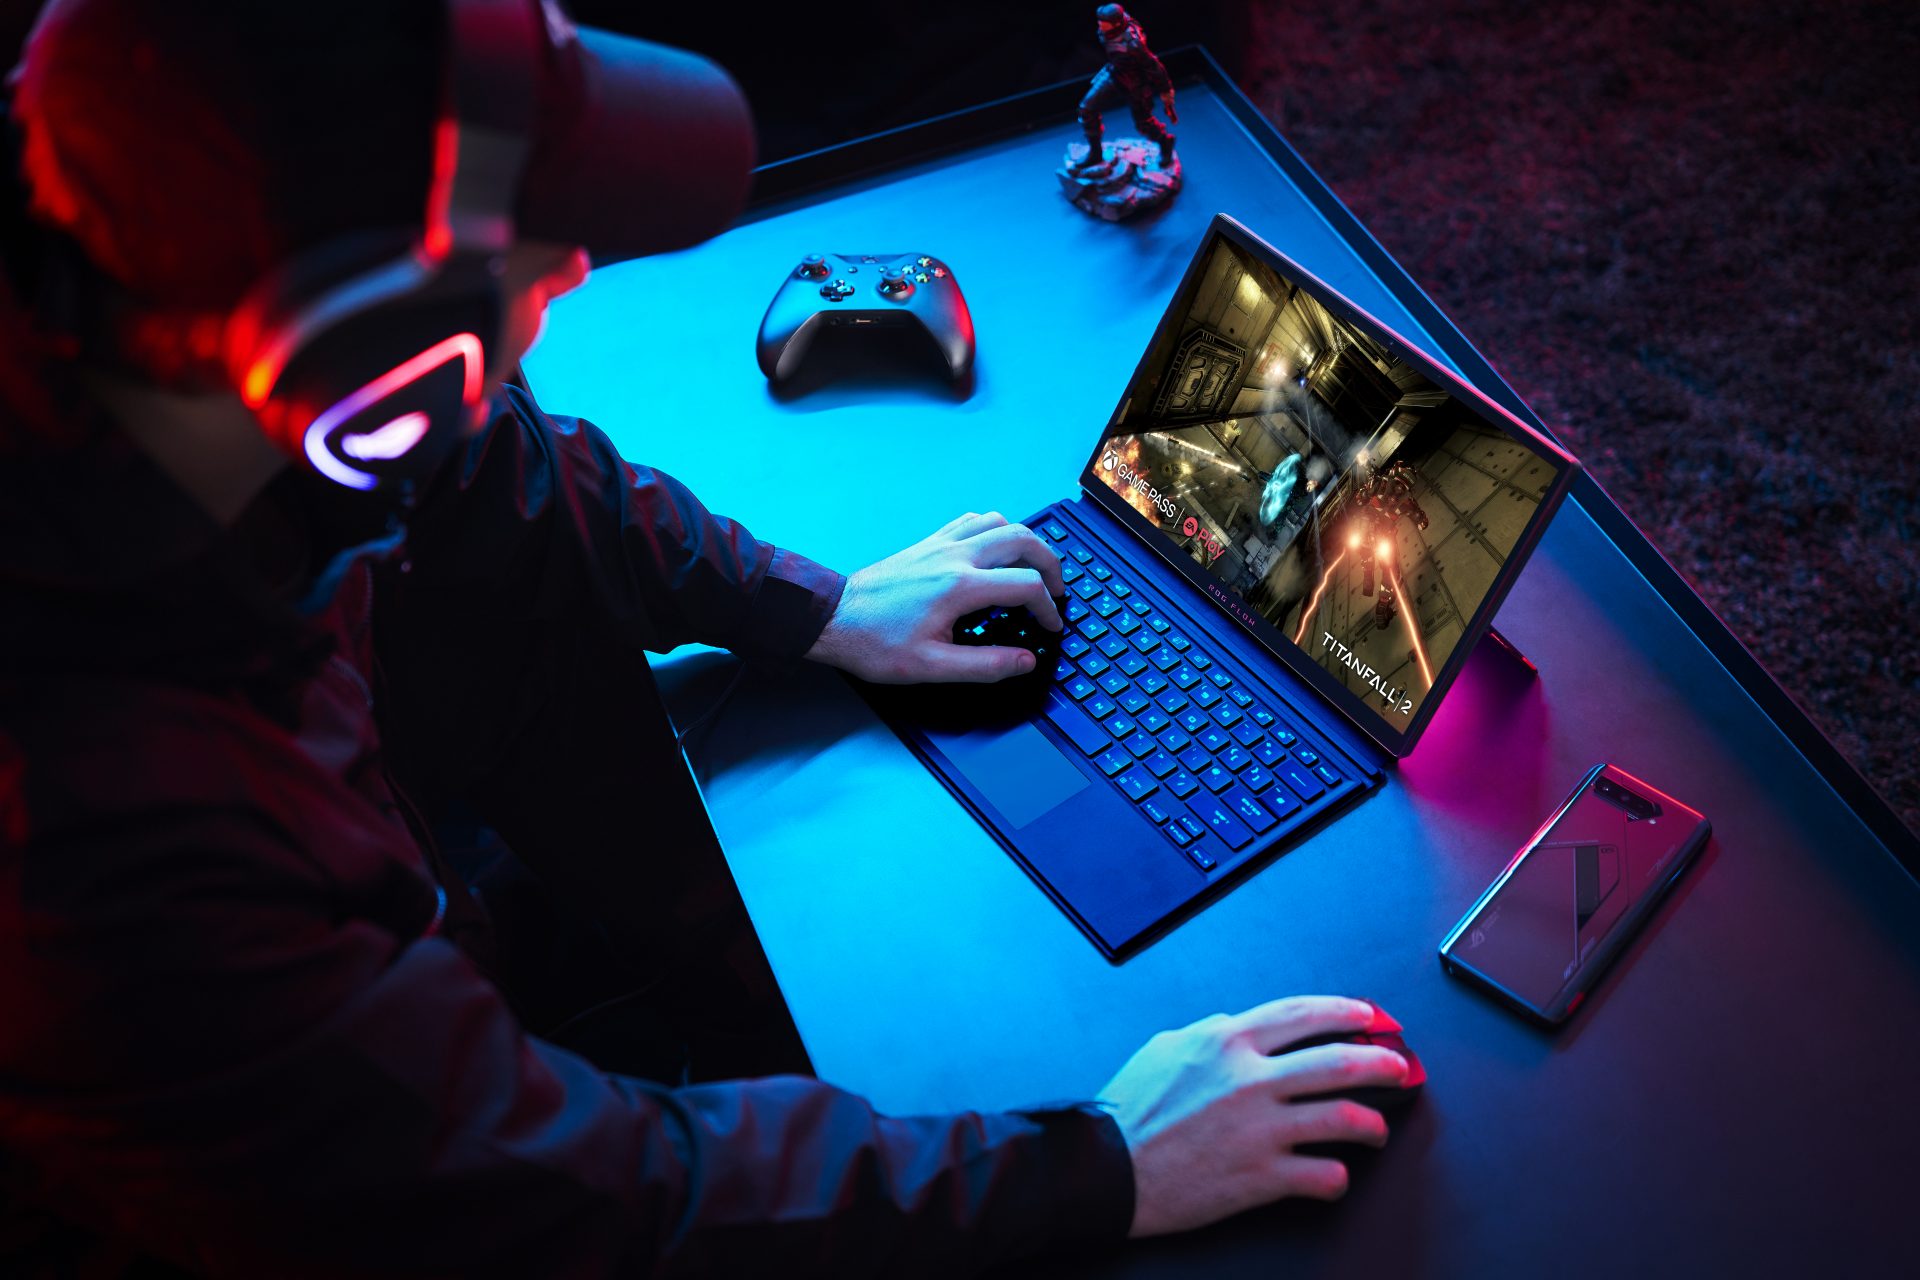 CES 2022: Asus Republic of Gamers unveiled an arsenal of new laptops that will blow your mind